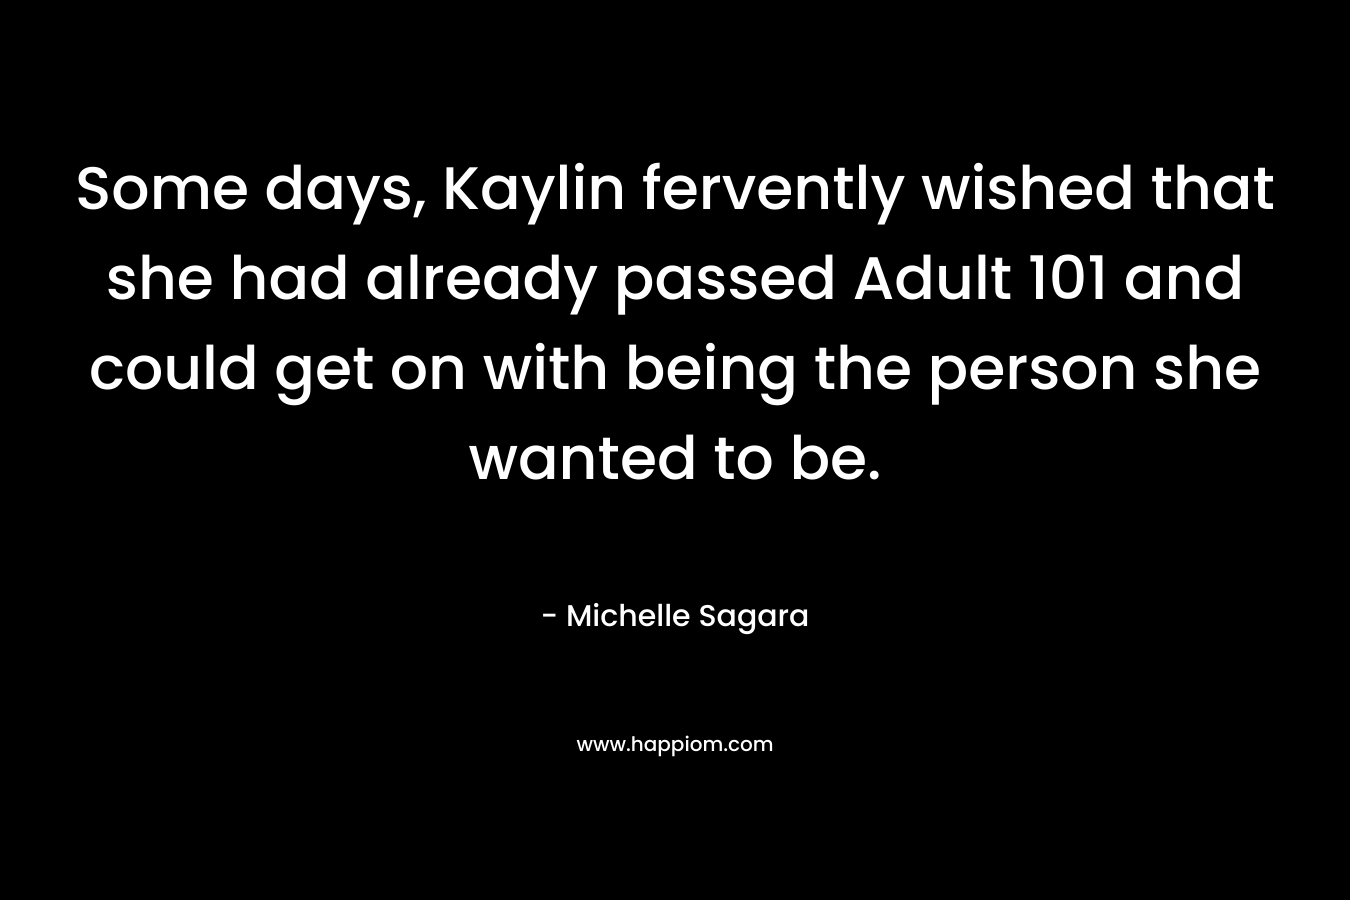 Some days, Kaylin fervently wished that she had already passed Adult 101 and could get on with being the person she wanted to be.